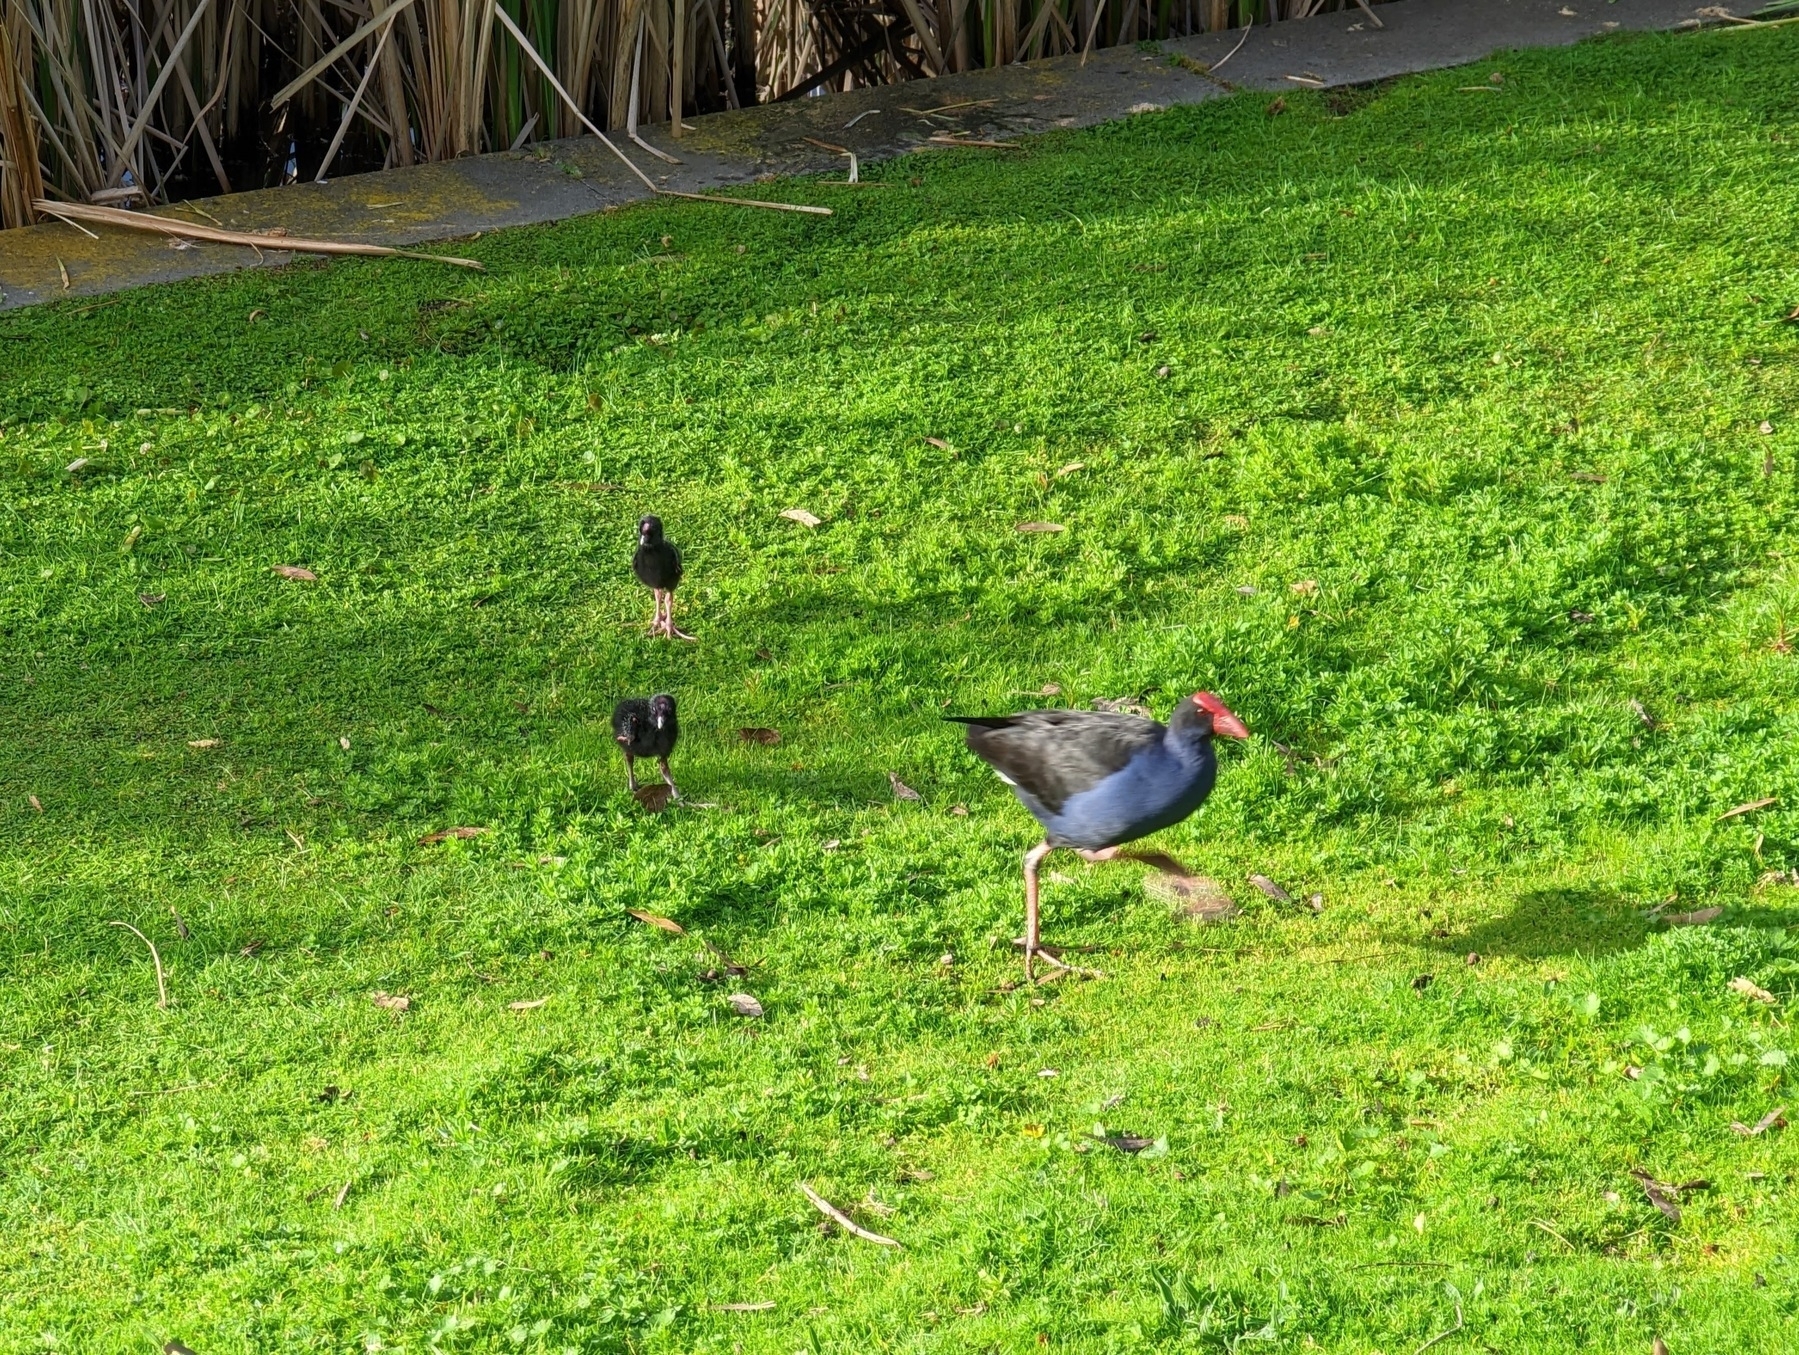 Purple swamphen with two chicks